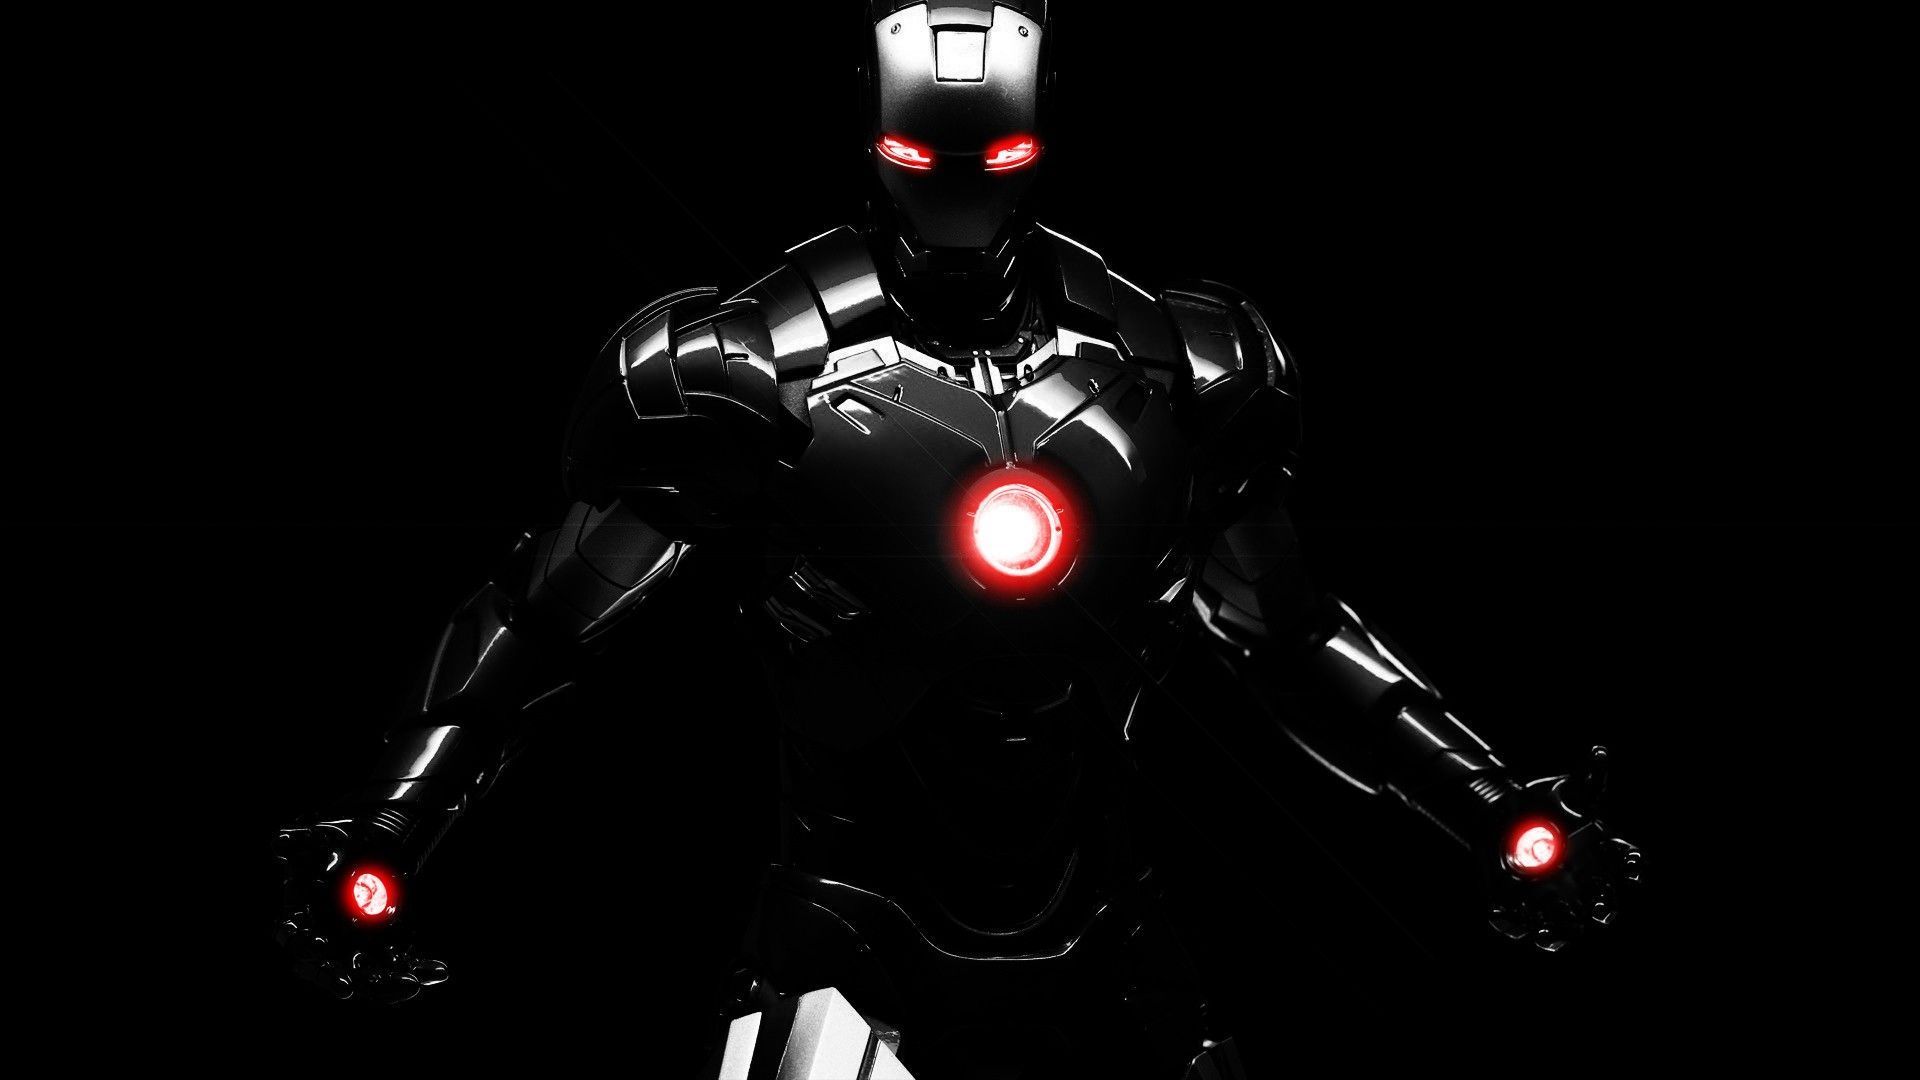 Desktop Wallpaper High Definition in 1080p with Iron Man Picture ...